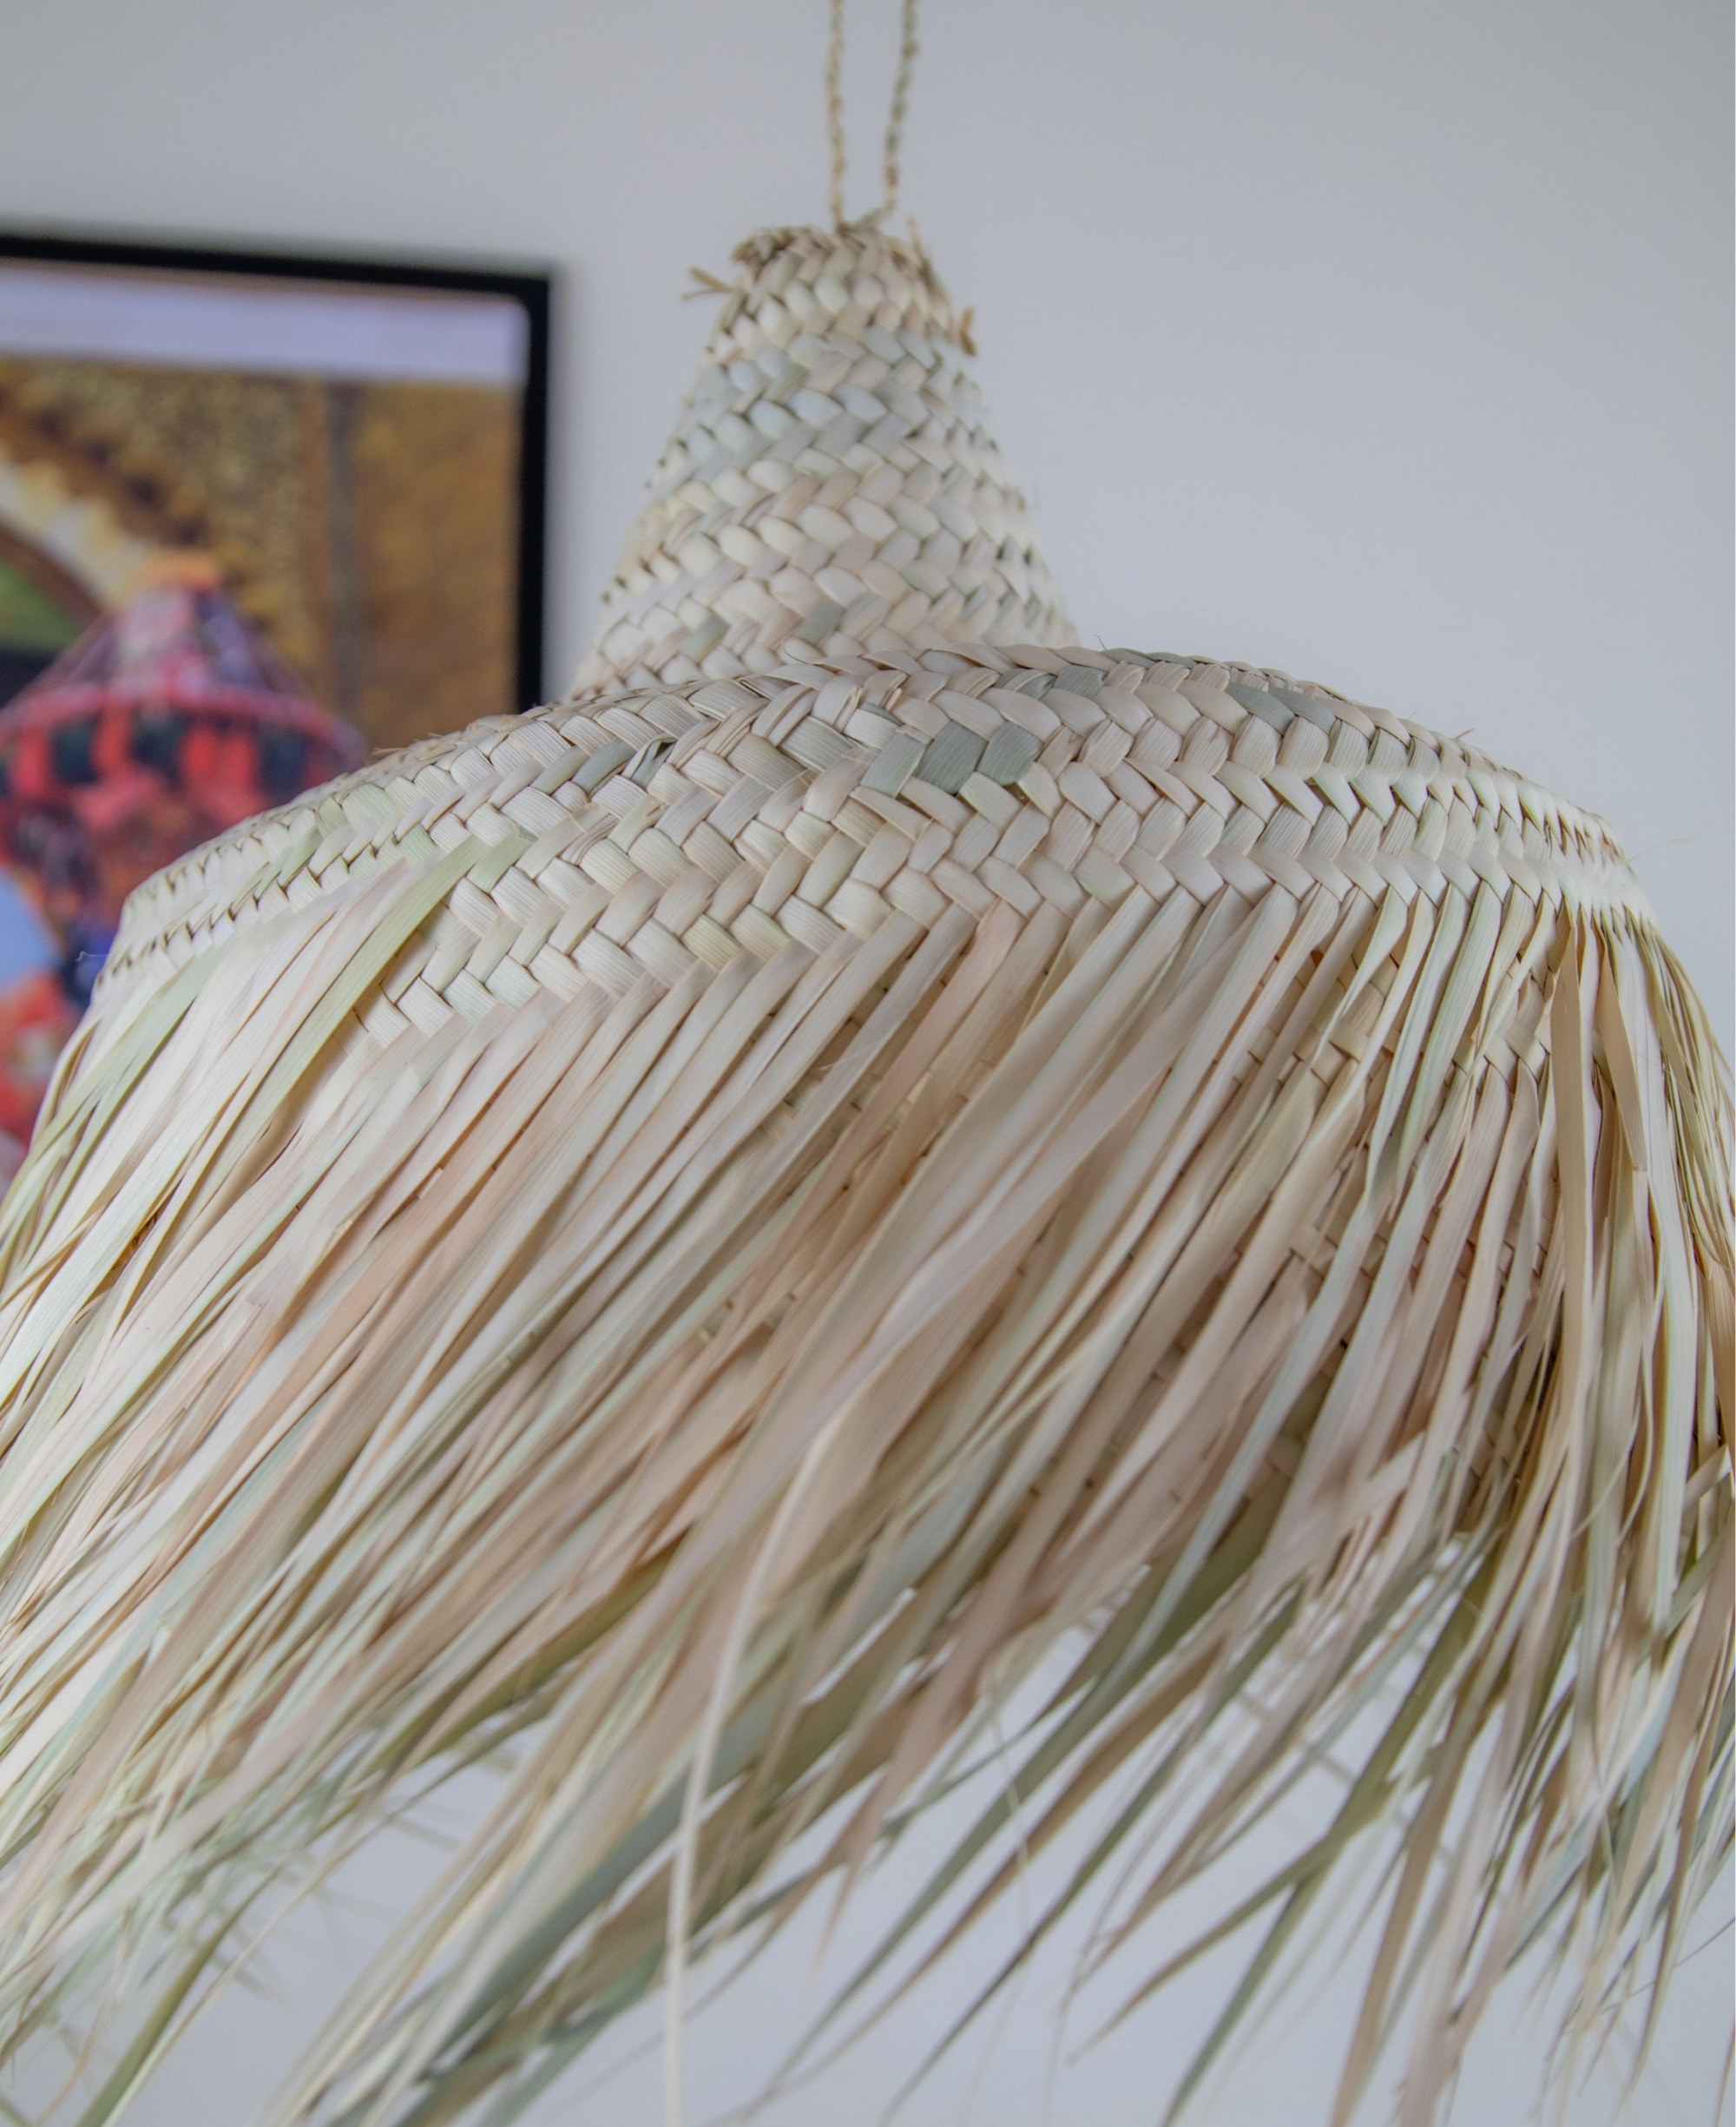 Moroccan Pendant Light with Natural Fiber Fringes - Stylish Suspension Hat Lampshade